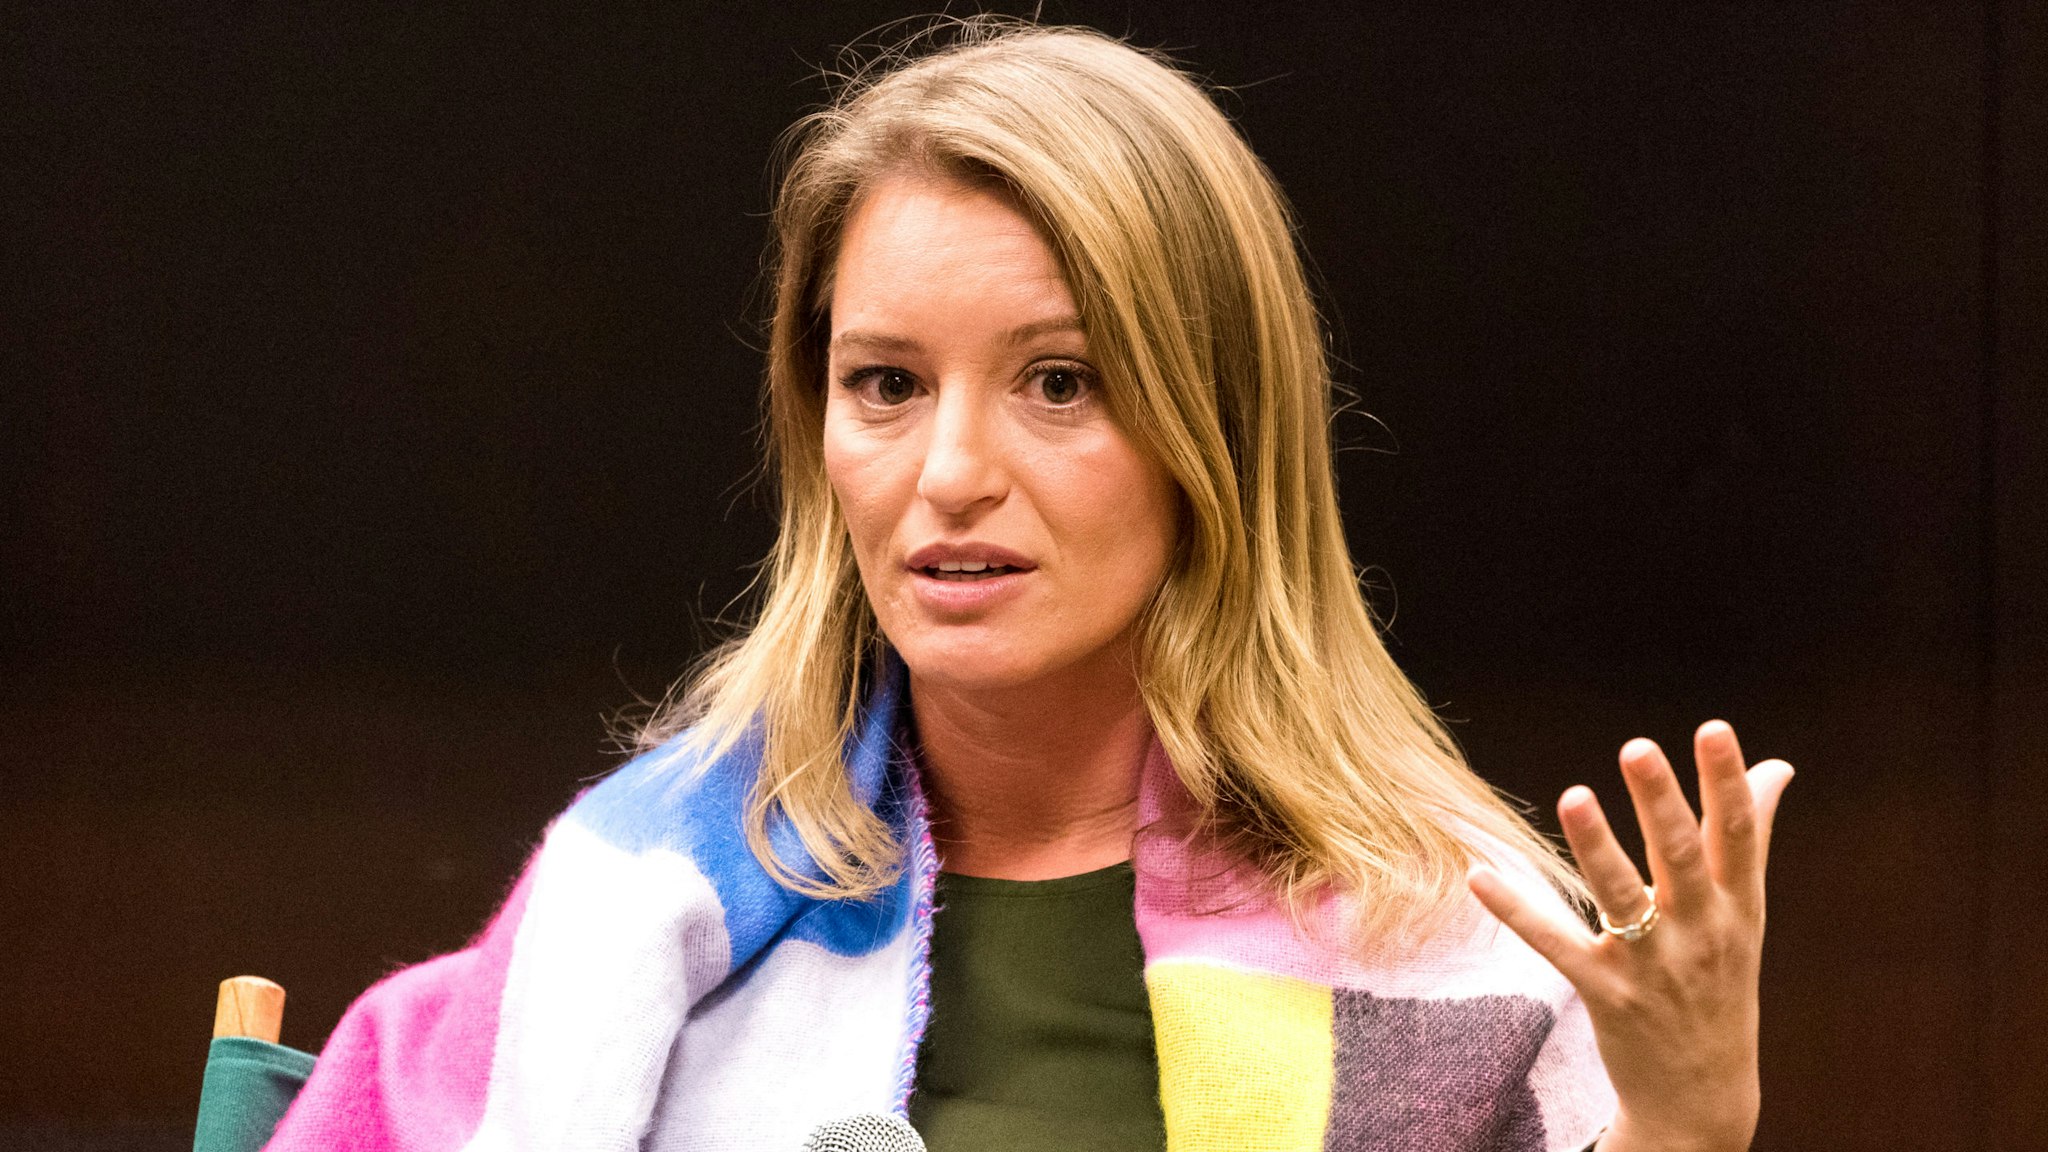 NEW YORK, NY, UNITED STATES - 2017/11/02: Katy Tur, NBC correspondent and author of "Unbelievable: My Front-Row Seat to the Craziest Campaign in American History" at Barnes &amp; Noble on the Upper West Side of New York.